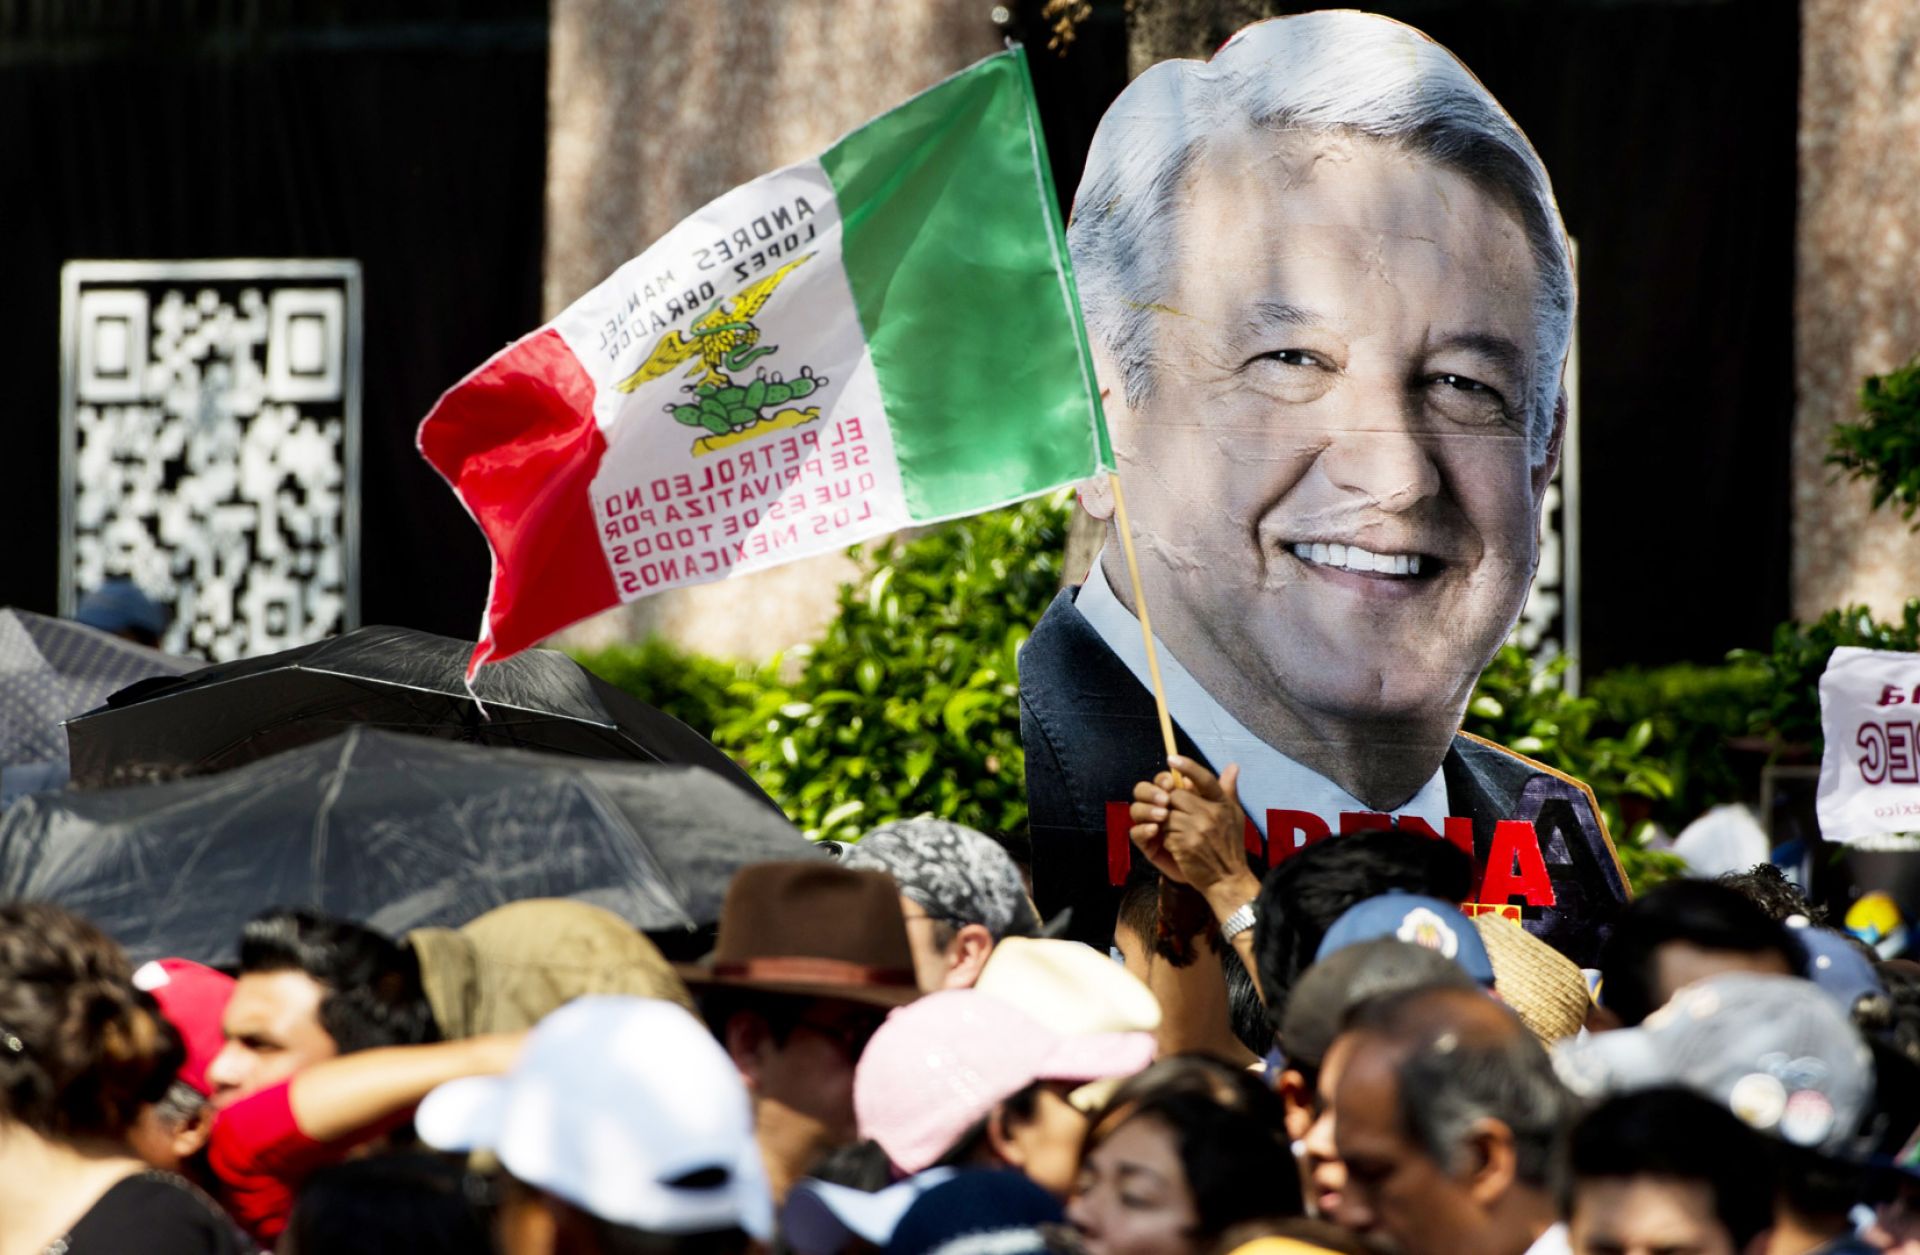 Mexico's Energy Reform Will Remain the Law of the Land